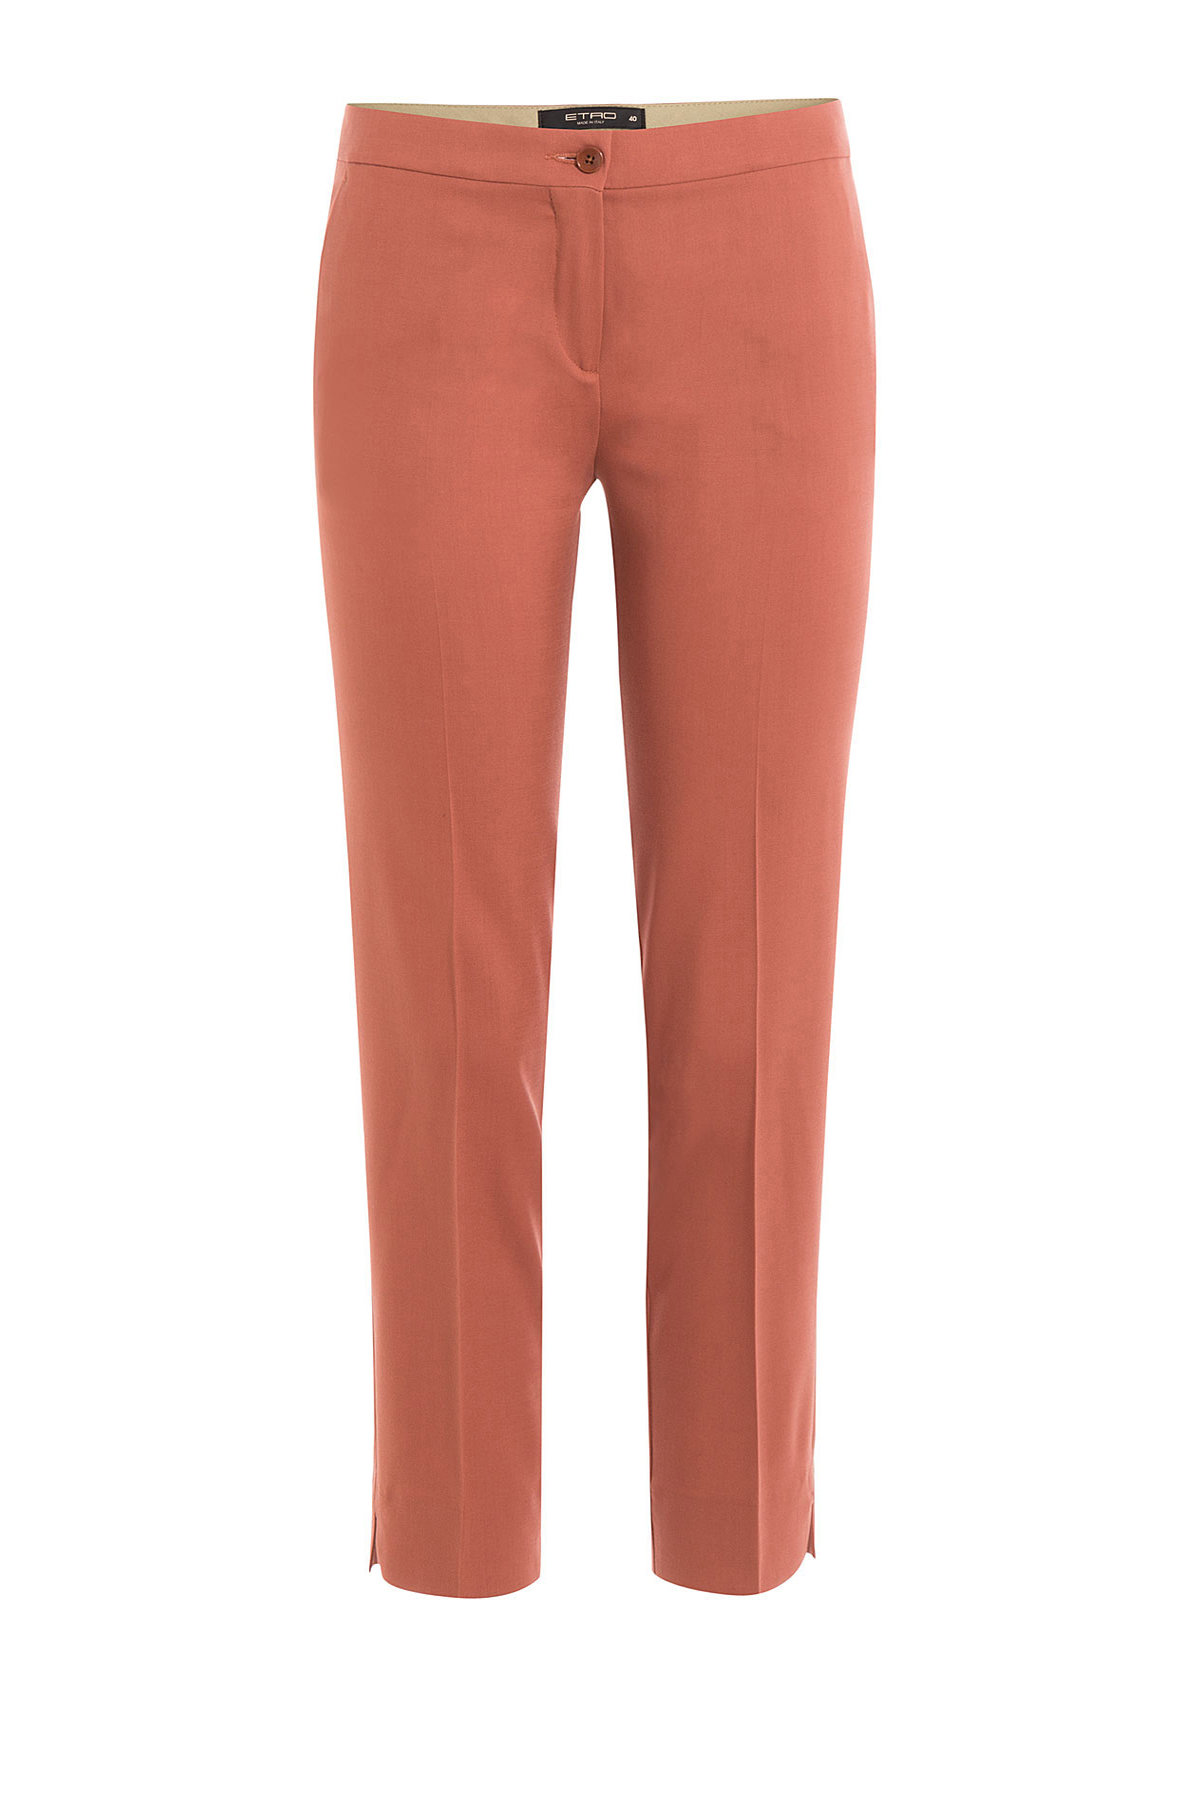 Etro - Slim Cropped Wool Trousers